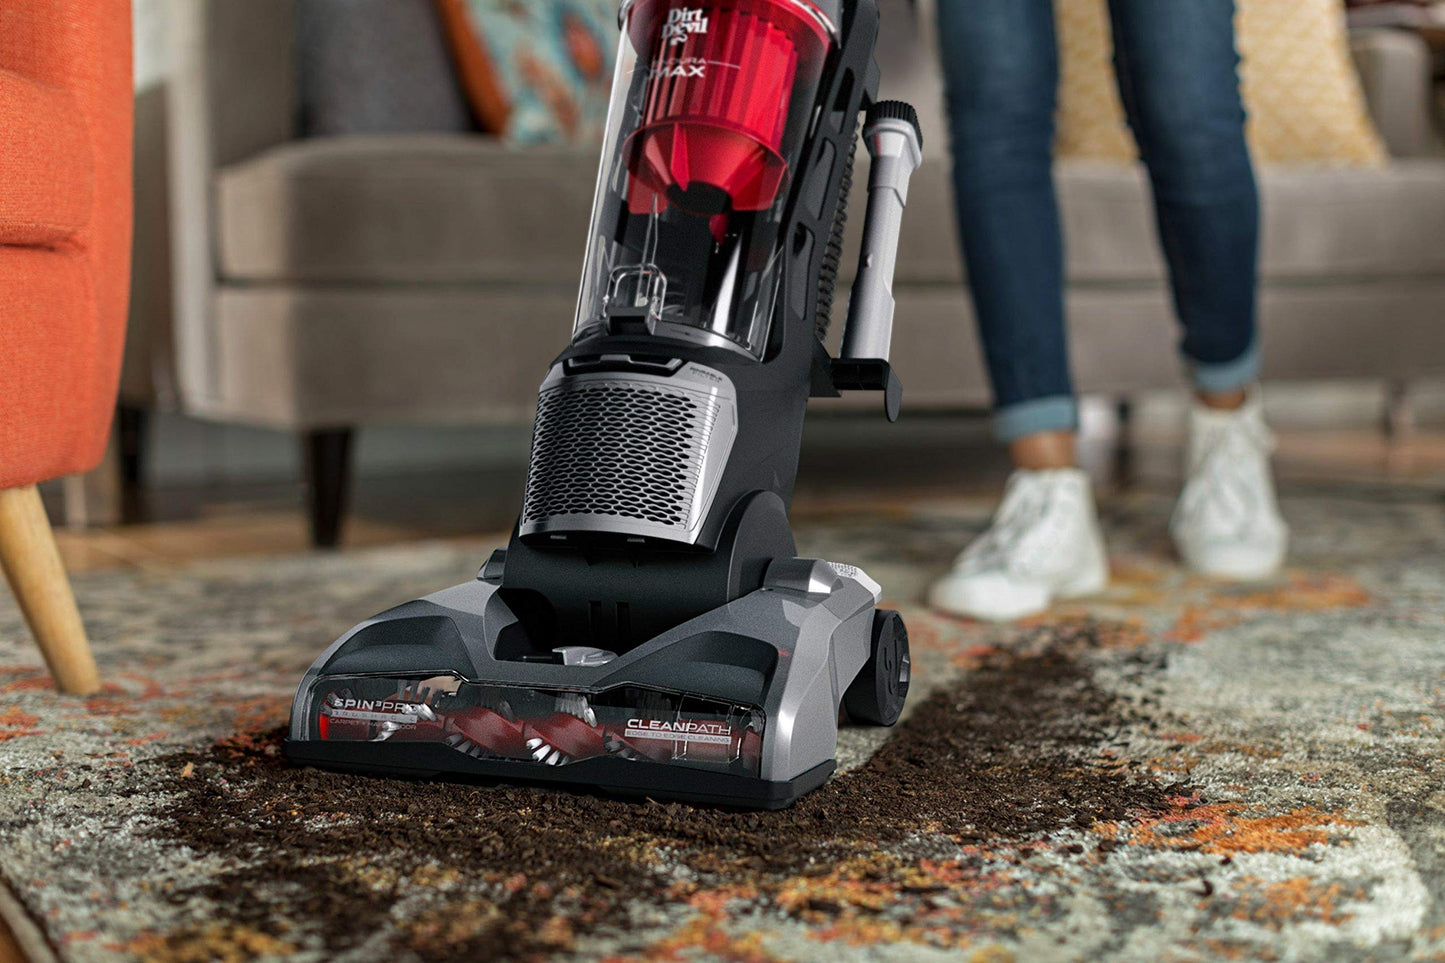 Dirt Devil Endura Max Upright Bagless Vacuum Cleaner for Carpet and Hard Floor, Powerful, Lightweight, Corded, UD70174B, Red - Like New